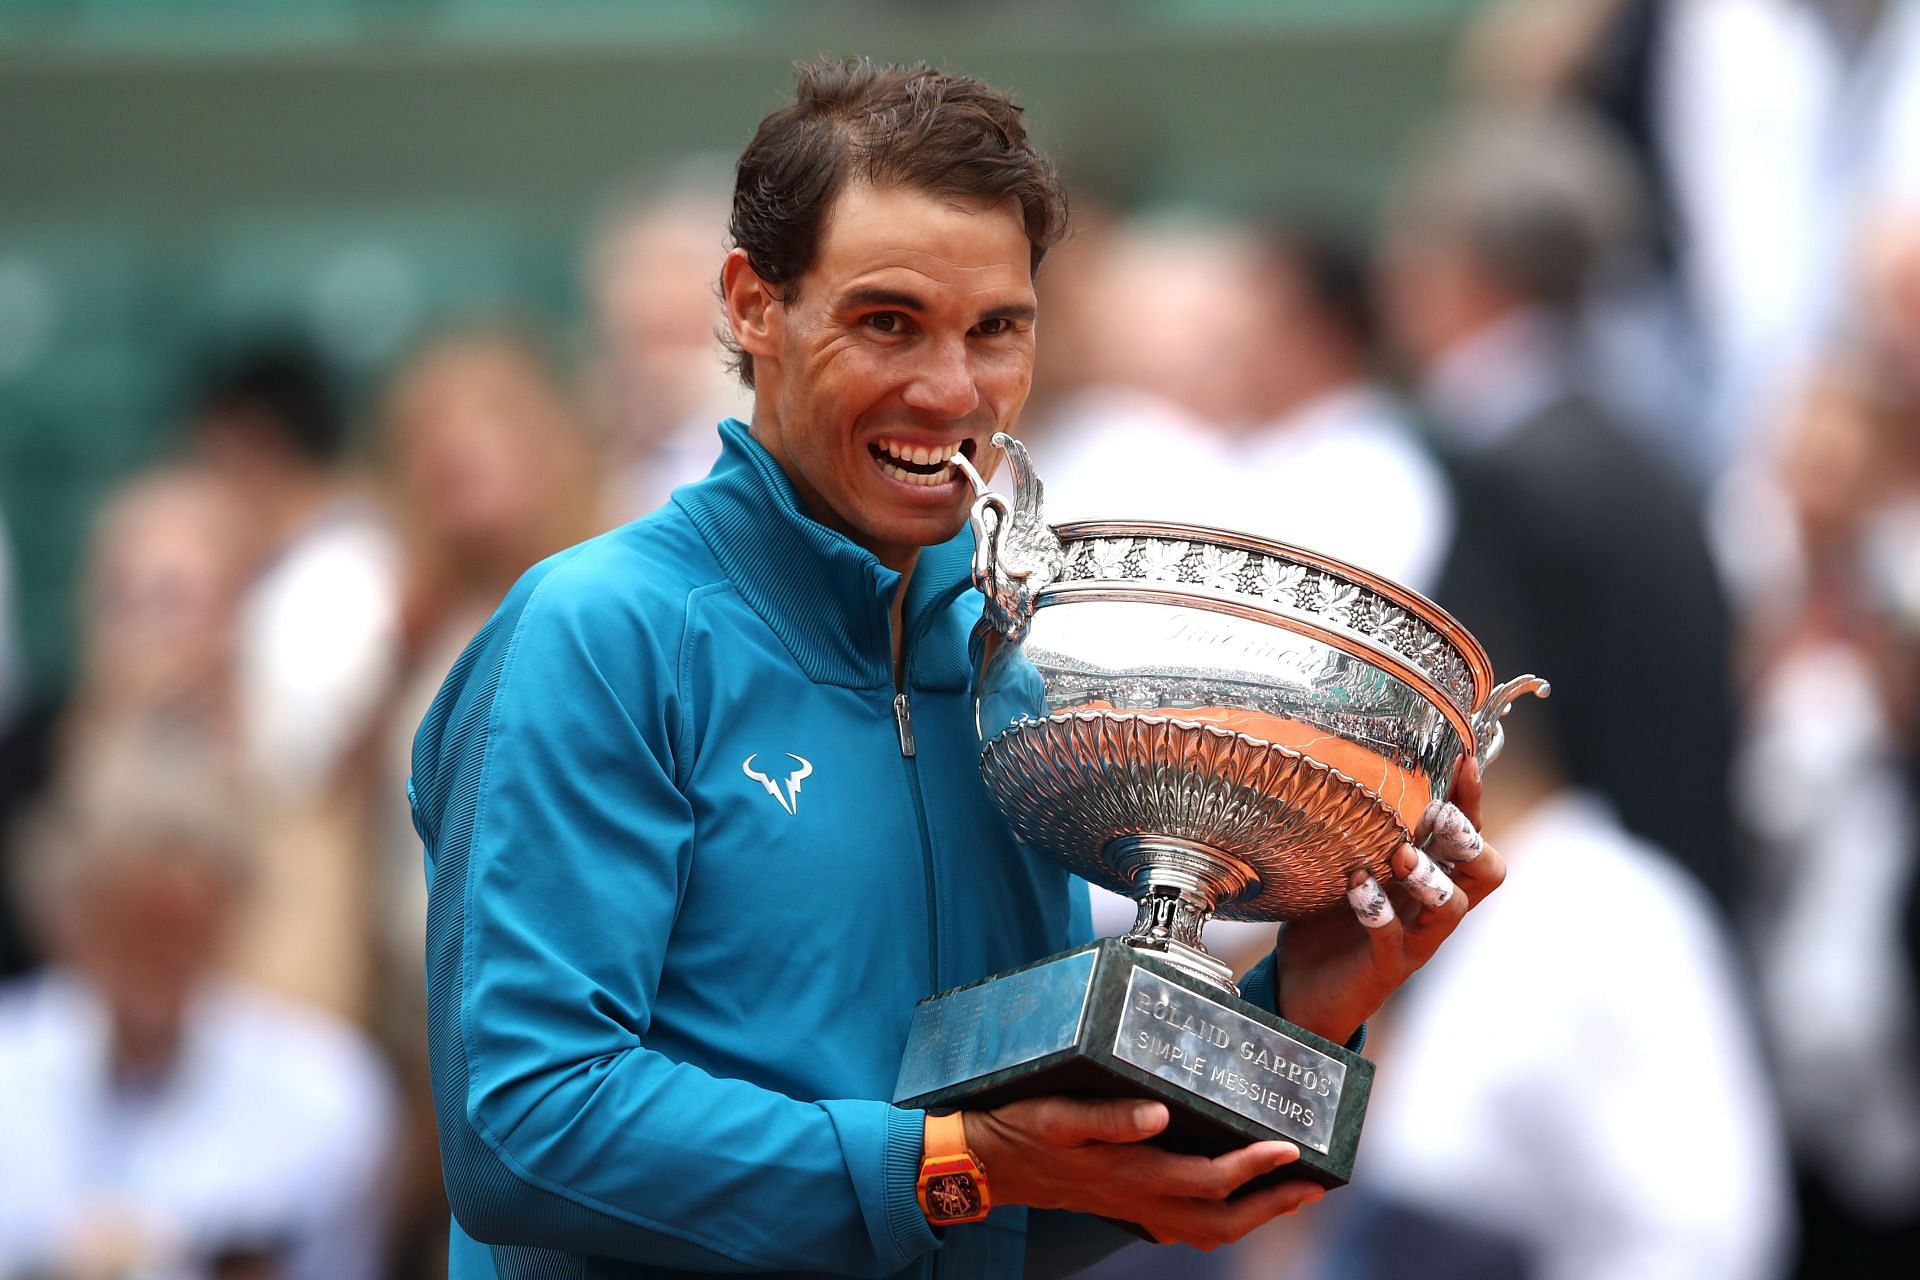 Rafael Nadal has a nightmare draw ahead of him at the 2022 French Open